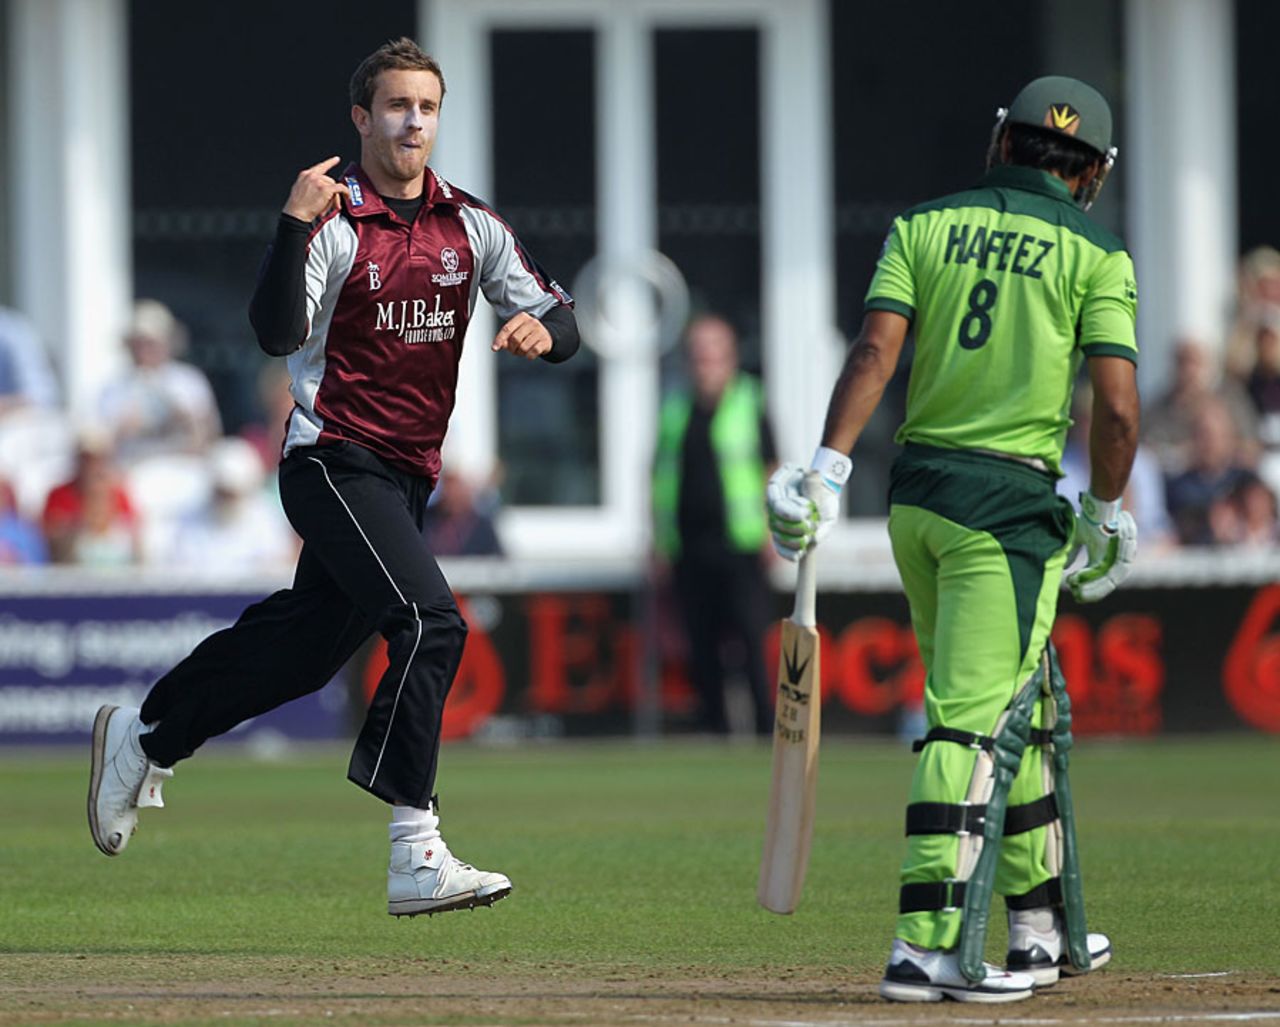 Mohammad Hafeez was sent on his way by Mark Turner for a duck, Somerset v Pakistanis, Tour Match, Taunton, September 2, 2010